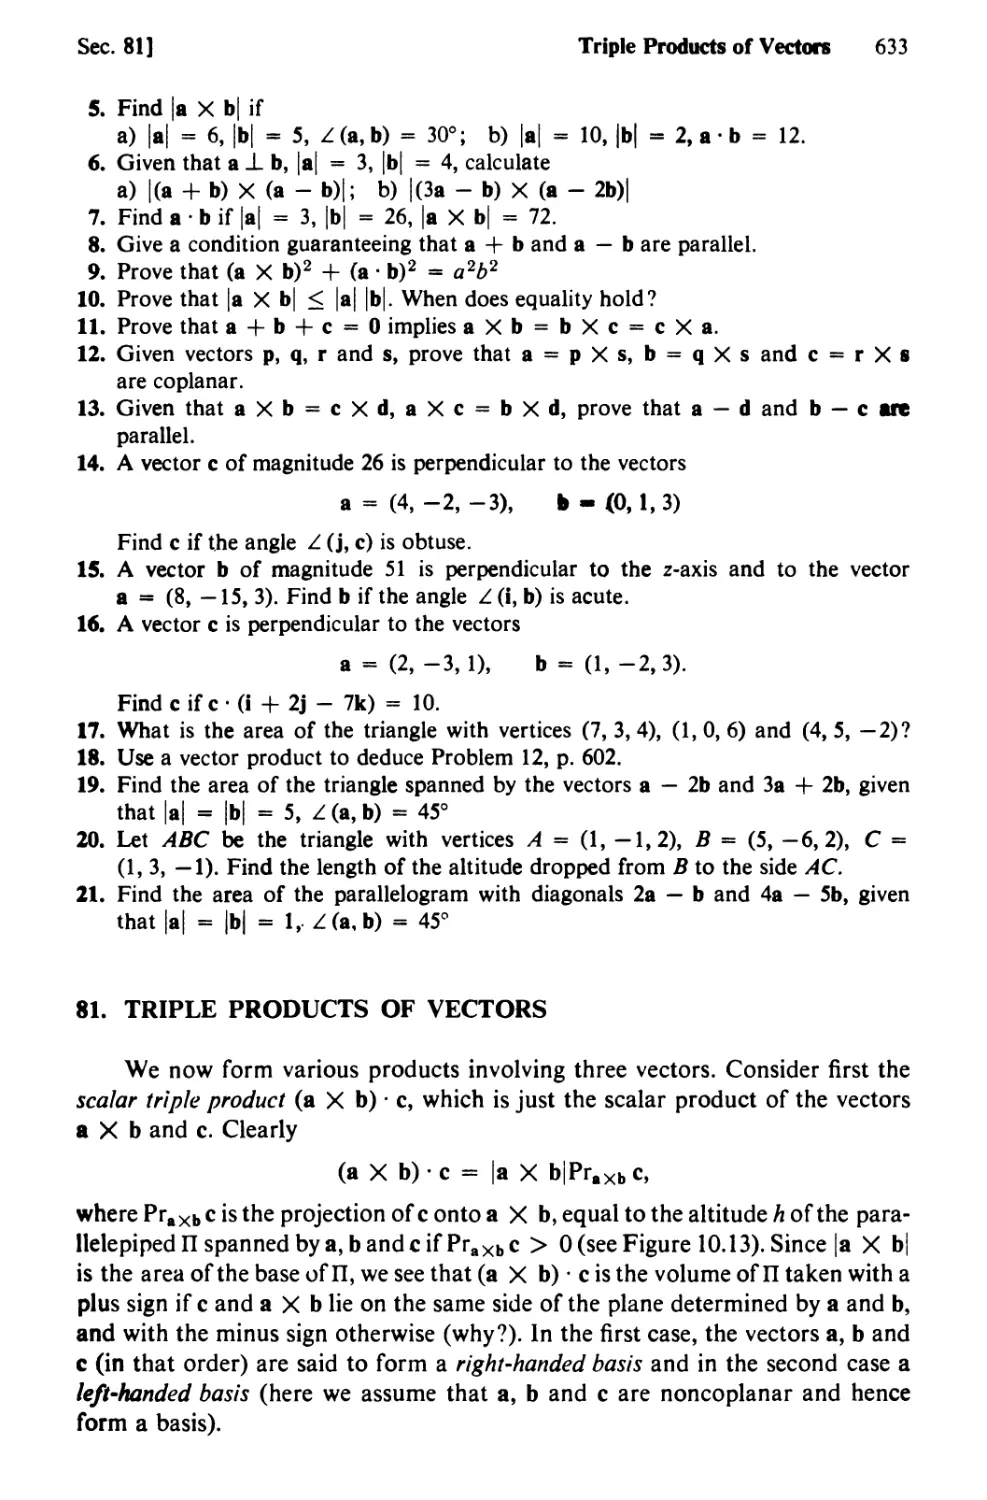 81. Triple Products of Vectors